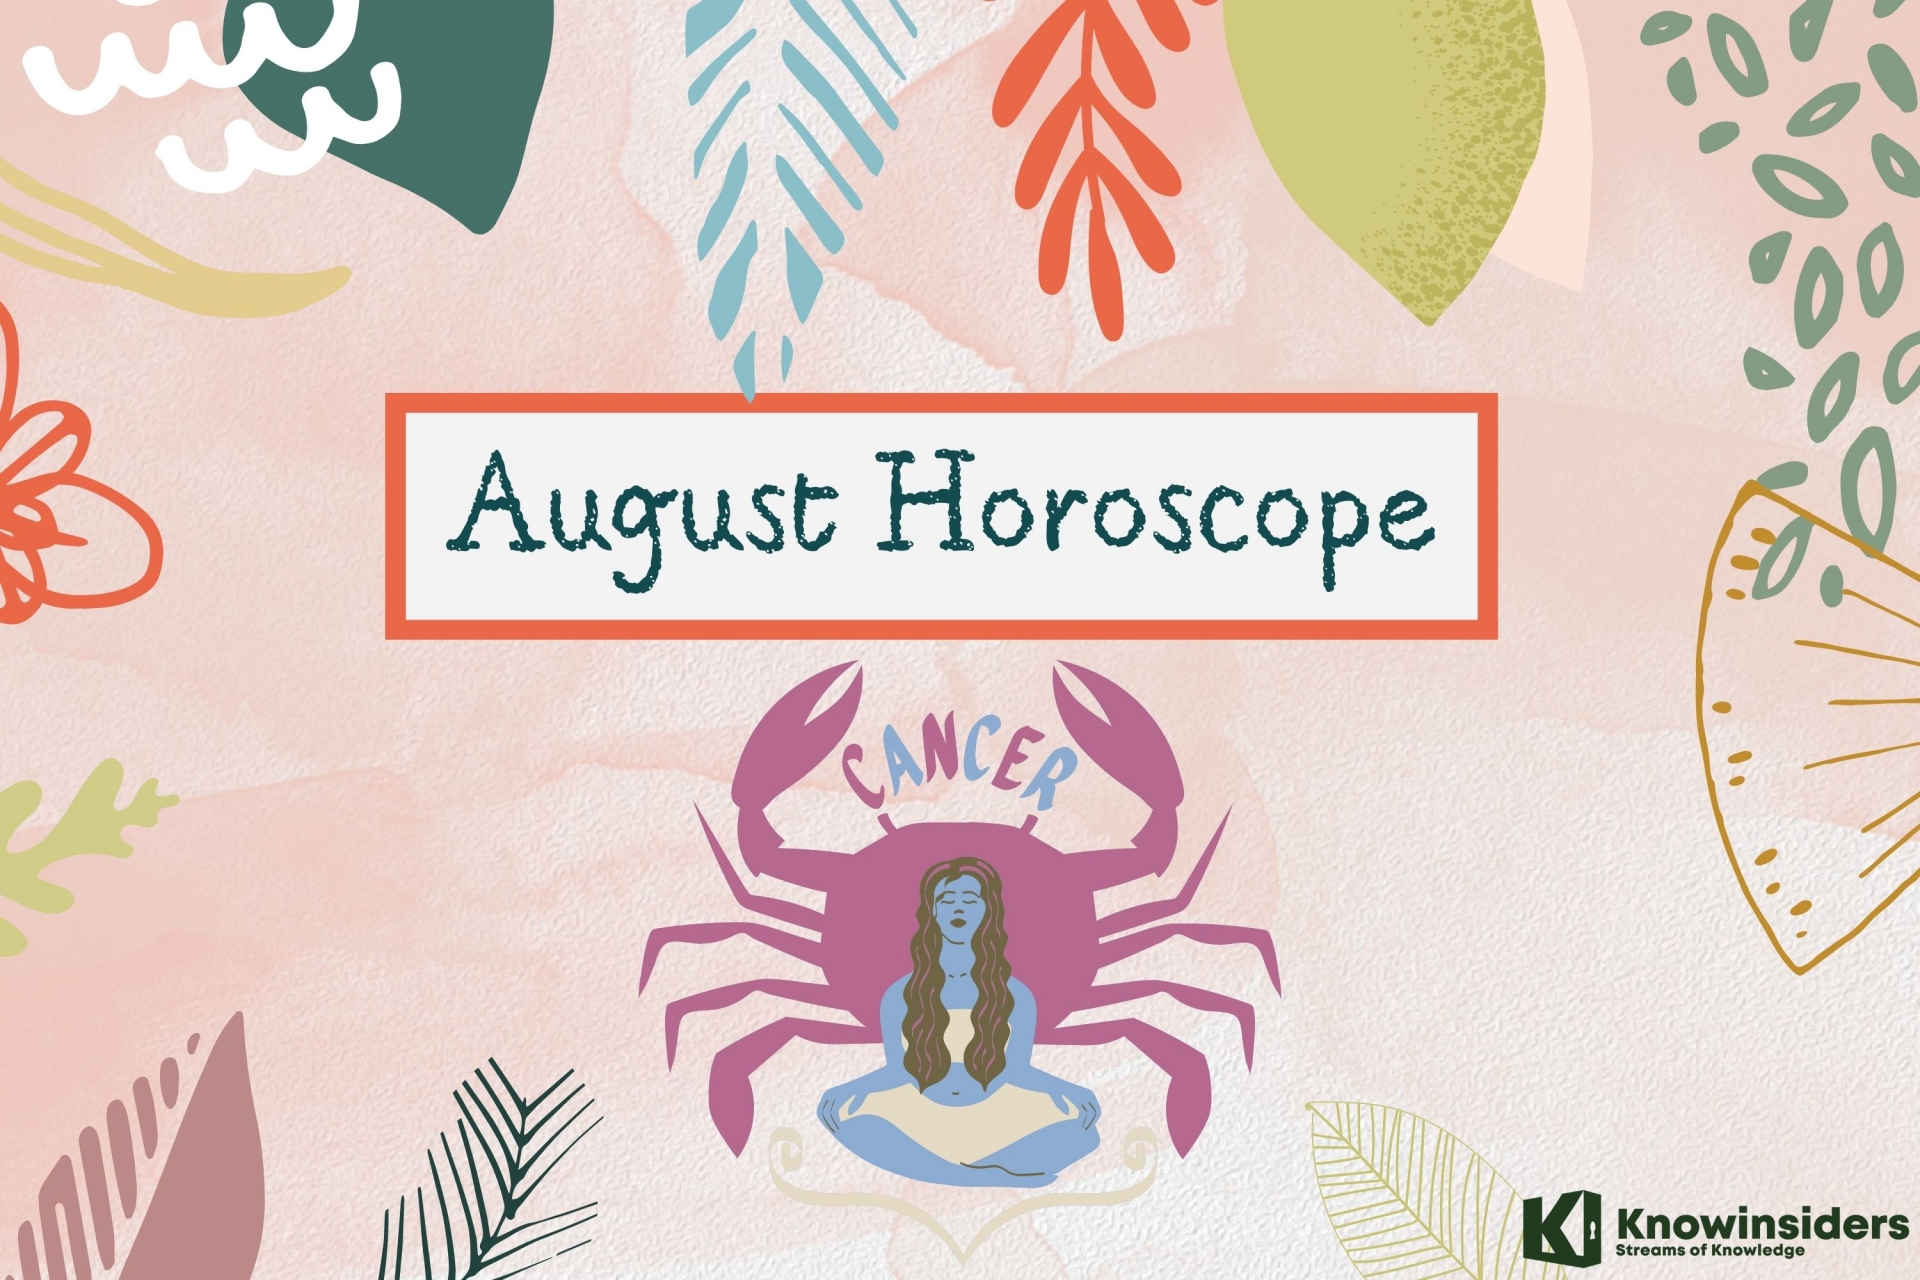 CANCER August 2022 Horoscope: Monthly Prediction for Love, Career, Money and Health